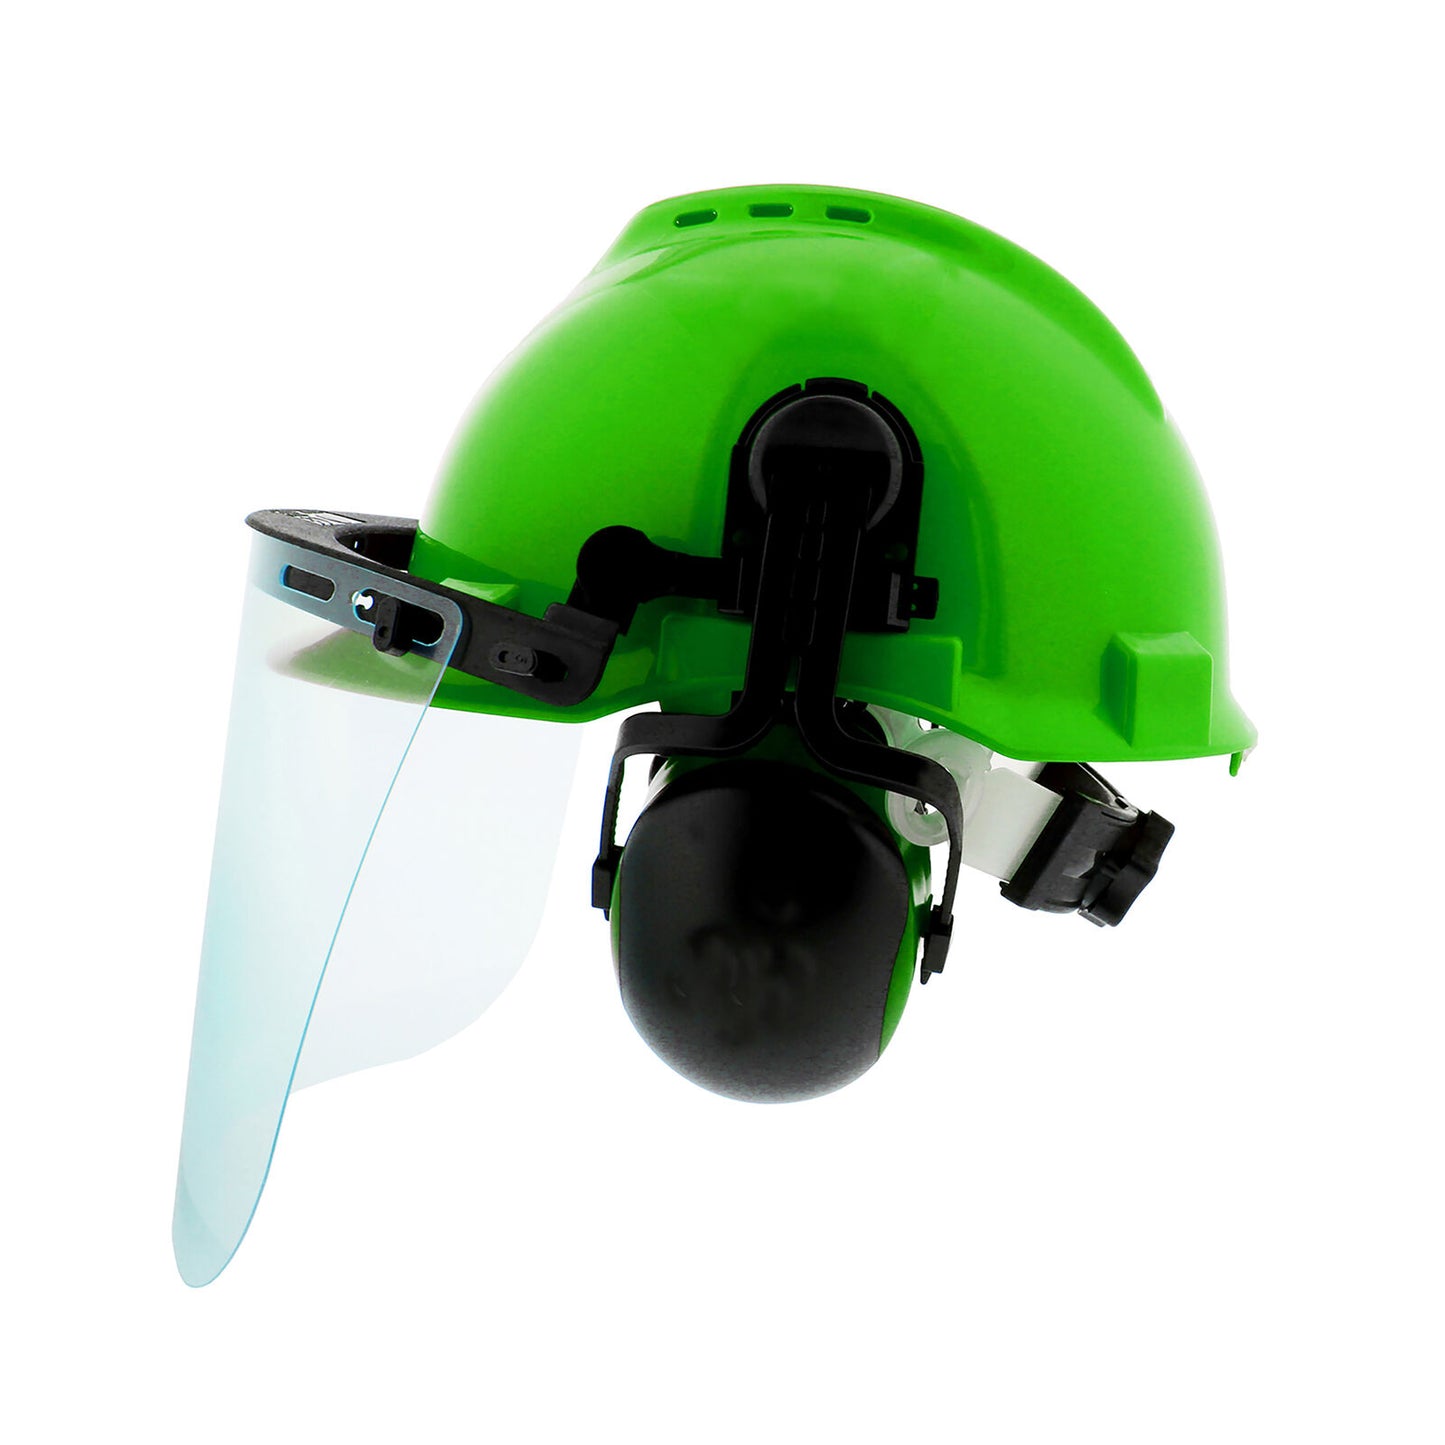 Forestry Safety Helmet with Safety Visor & Earmuffs